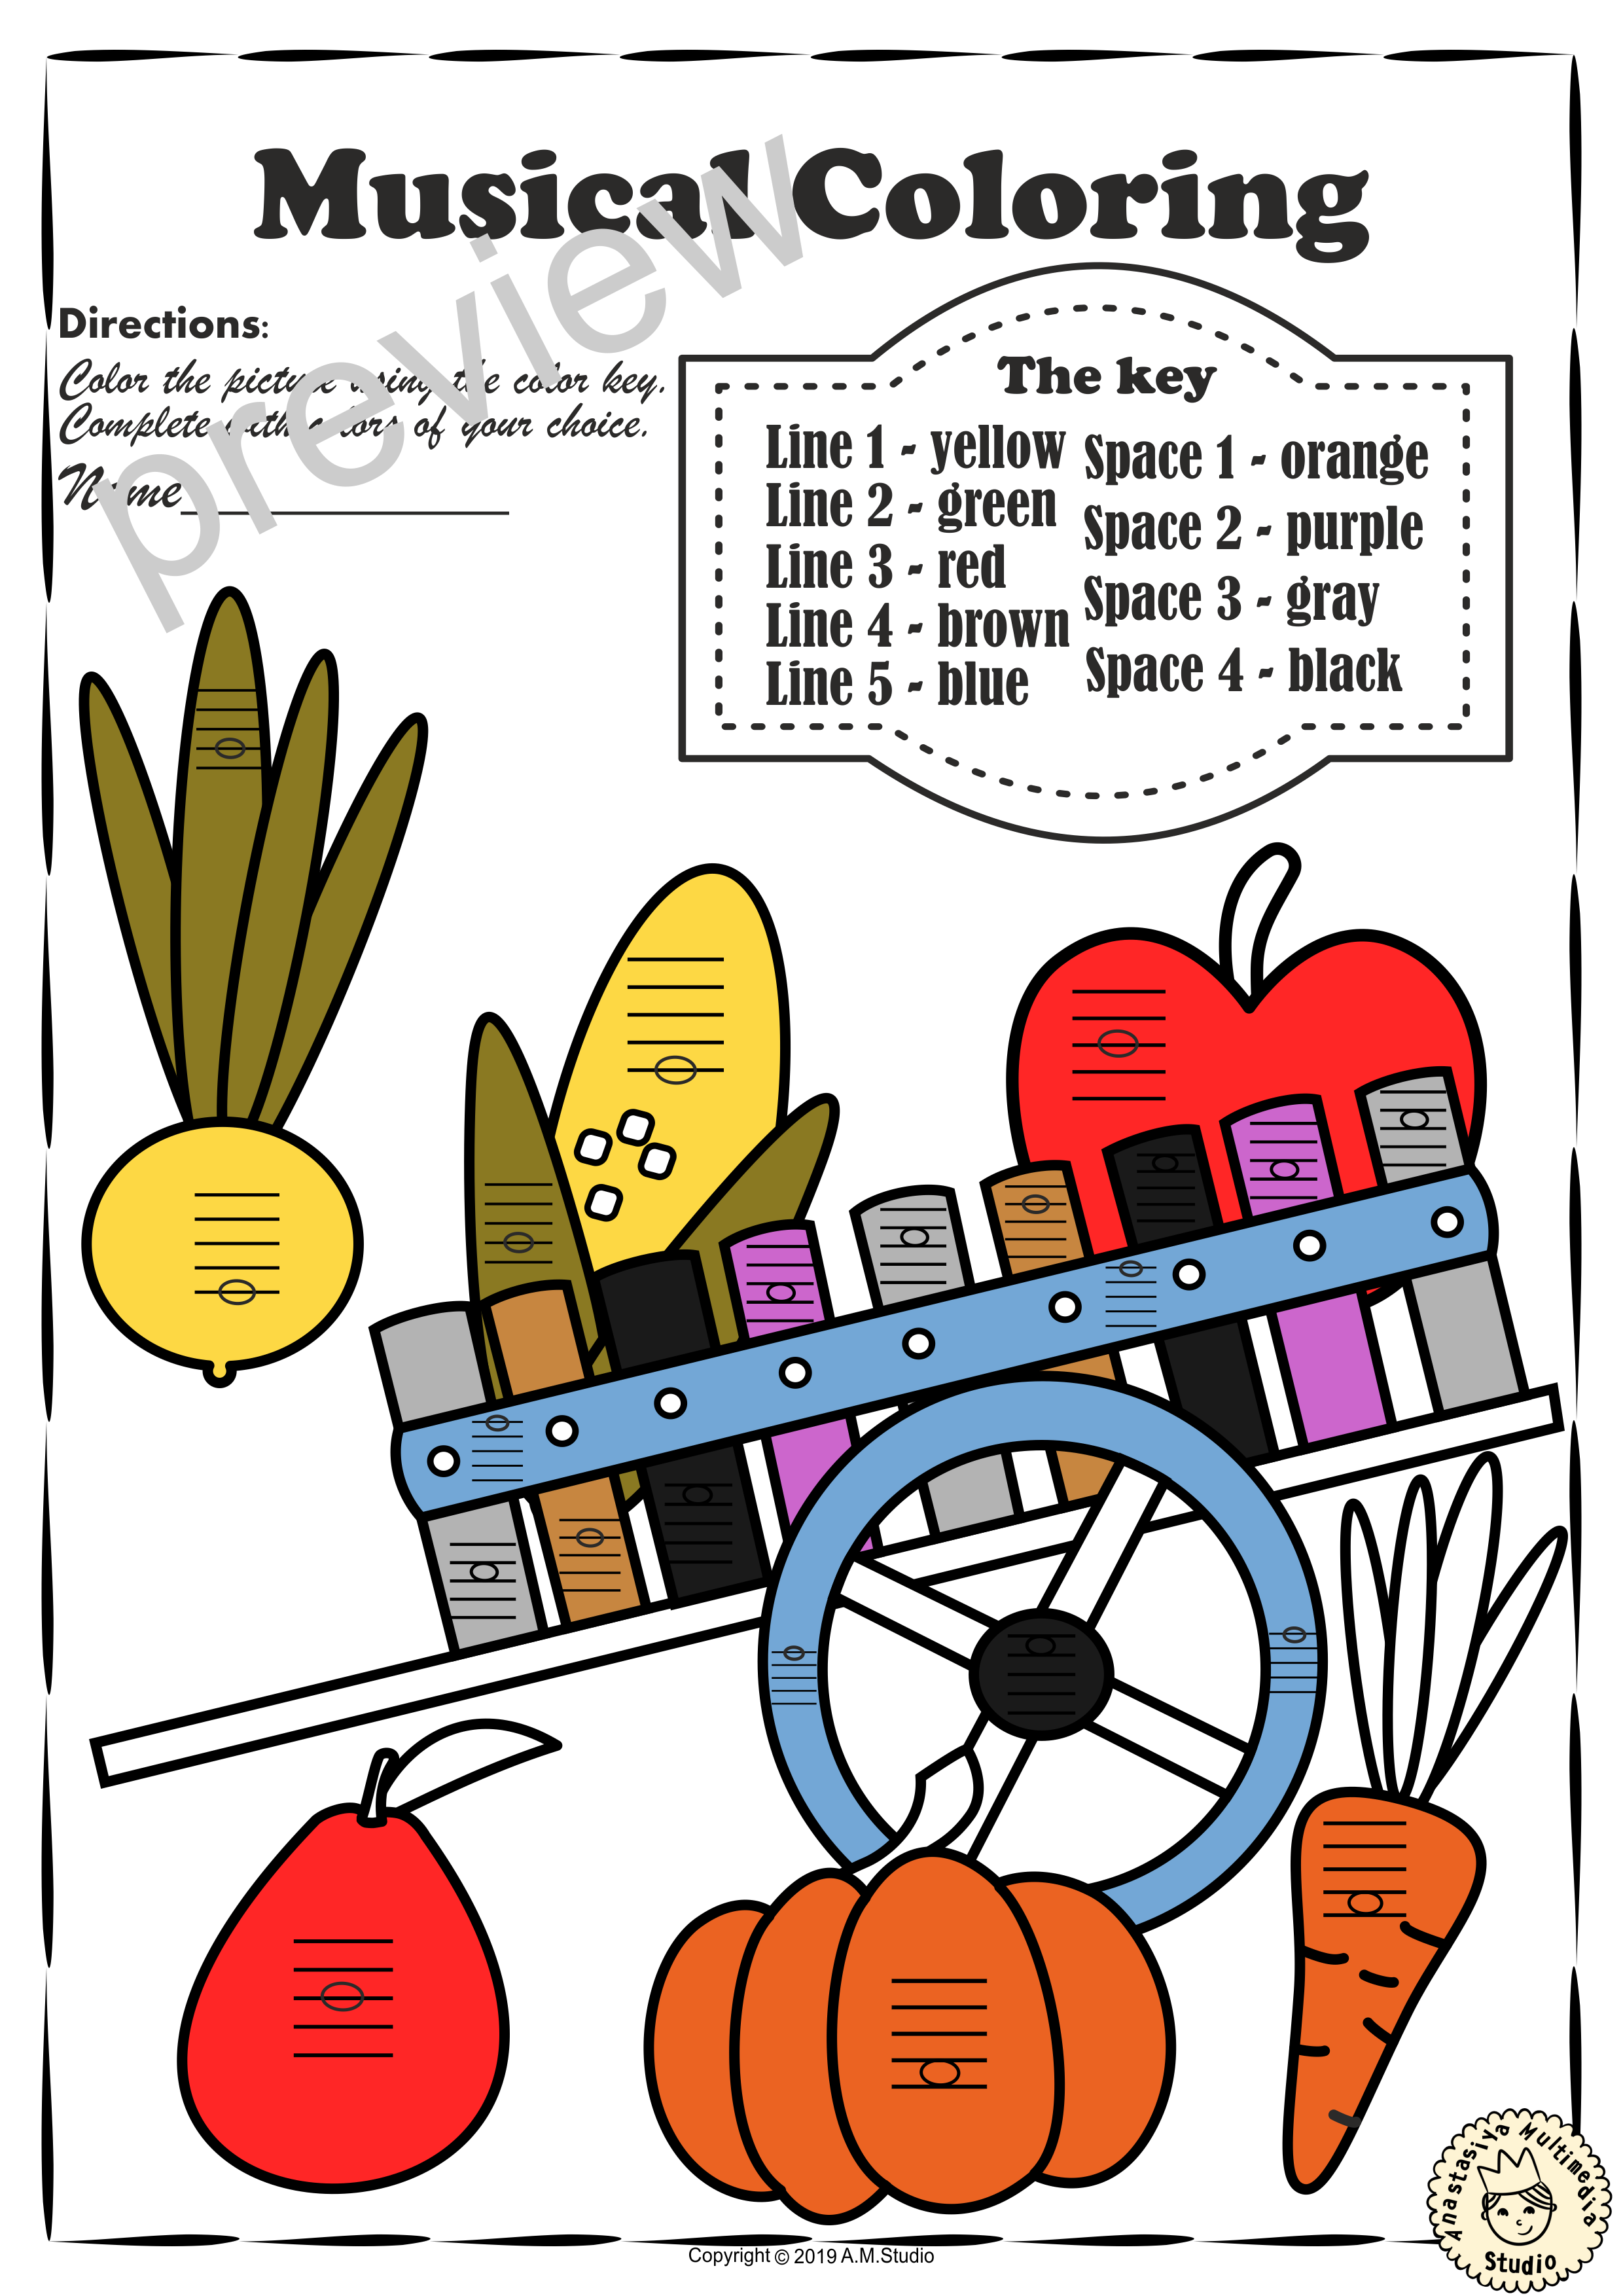 Musical Coloring Pages for Fall {Lines and Spaces} with answers (img # 4)